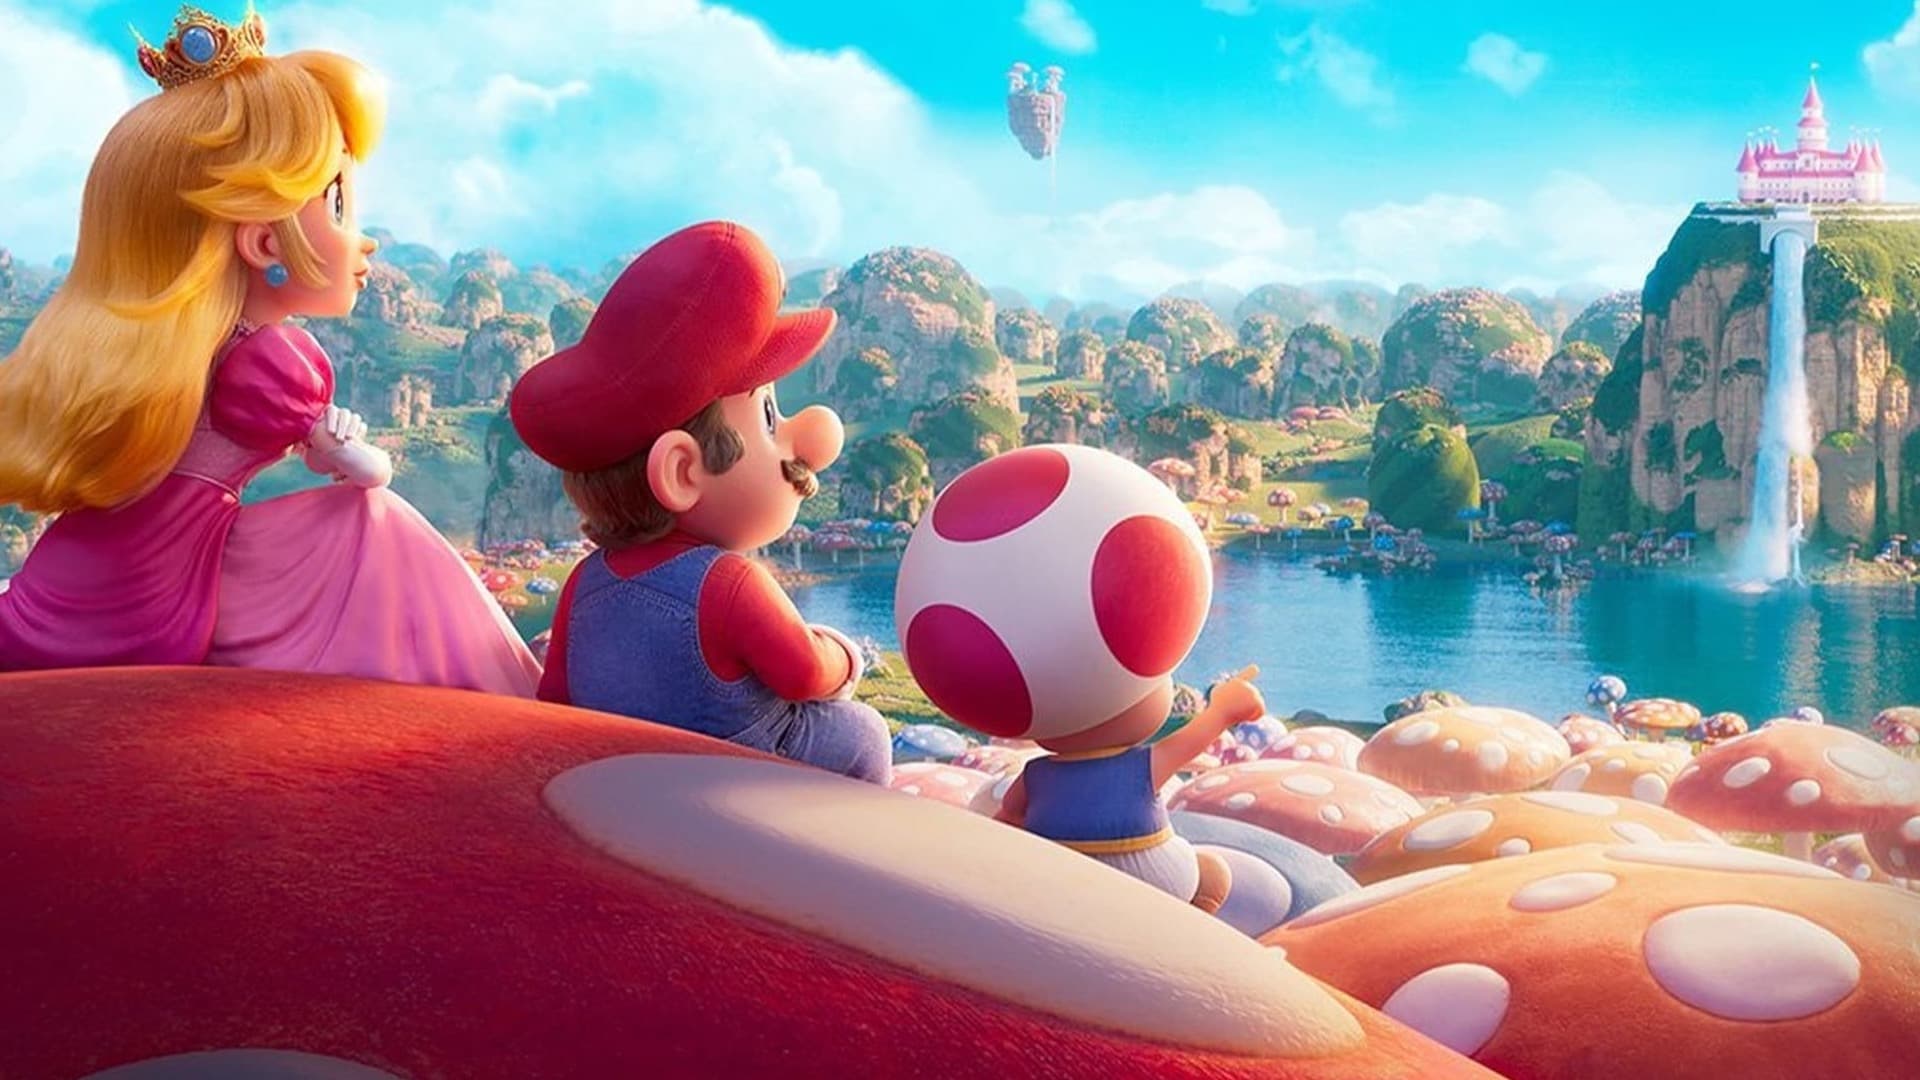 Princess Peach, Mario, and Toad look out over a mushroom-shaped kingdom in a scene from the Super Mario Bros. movie. - Super Mario